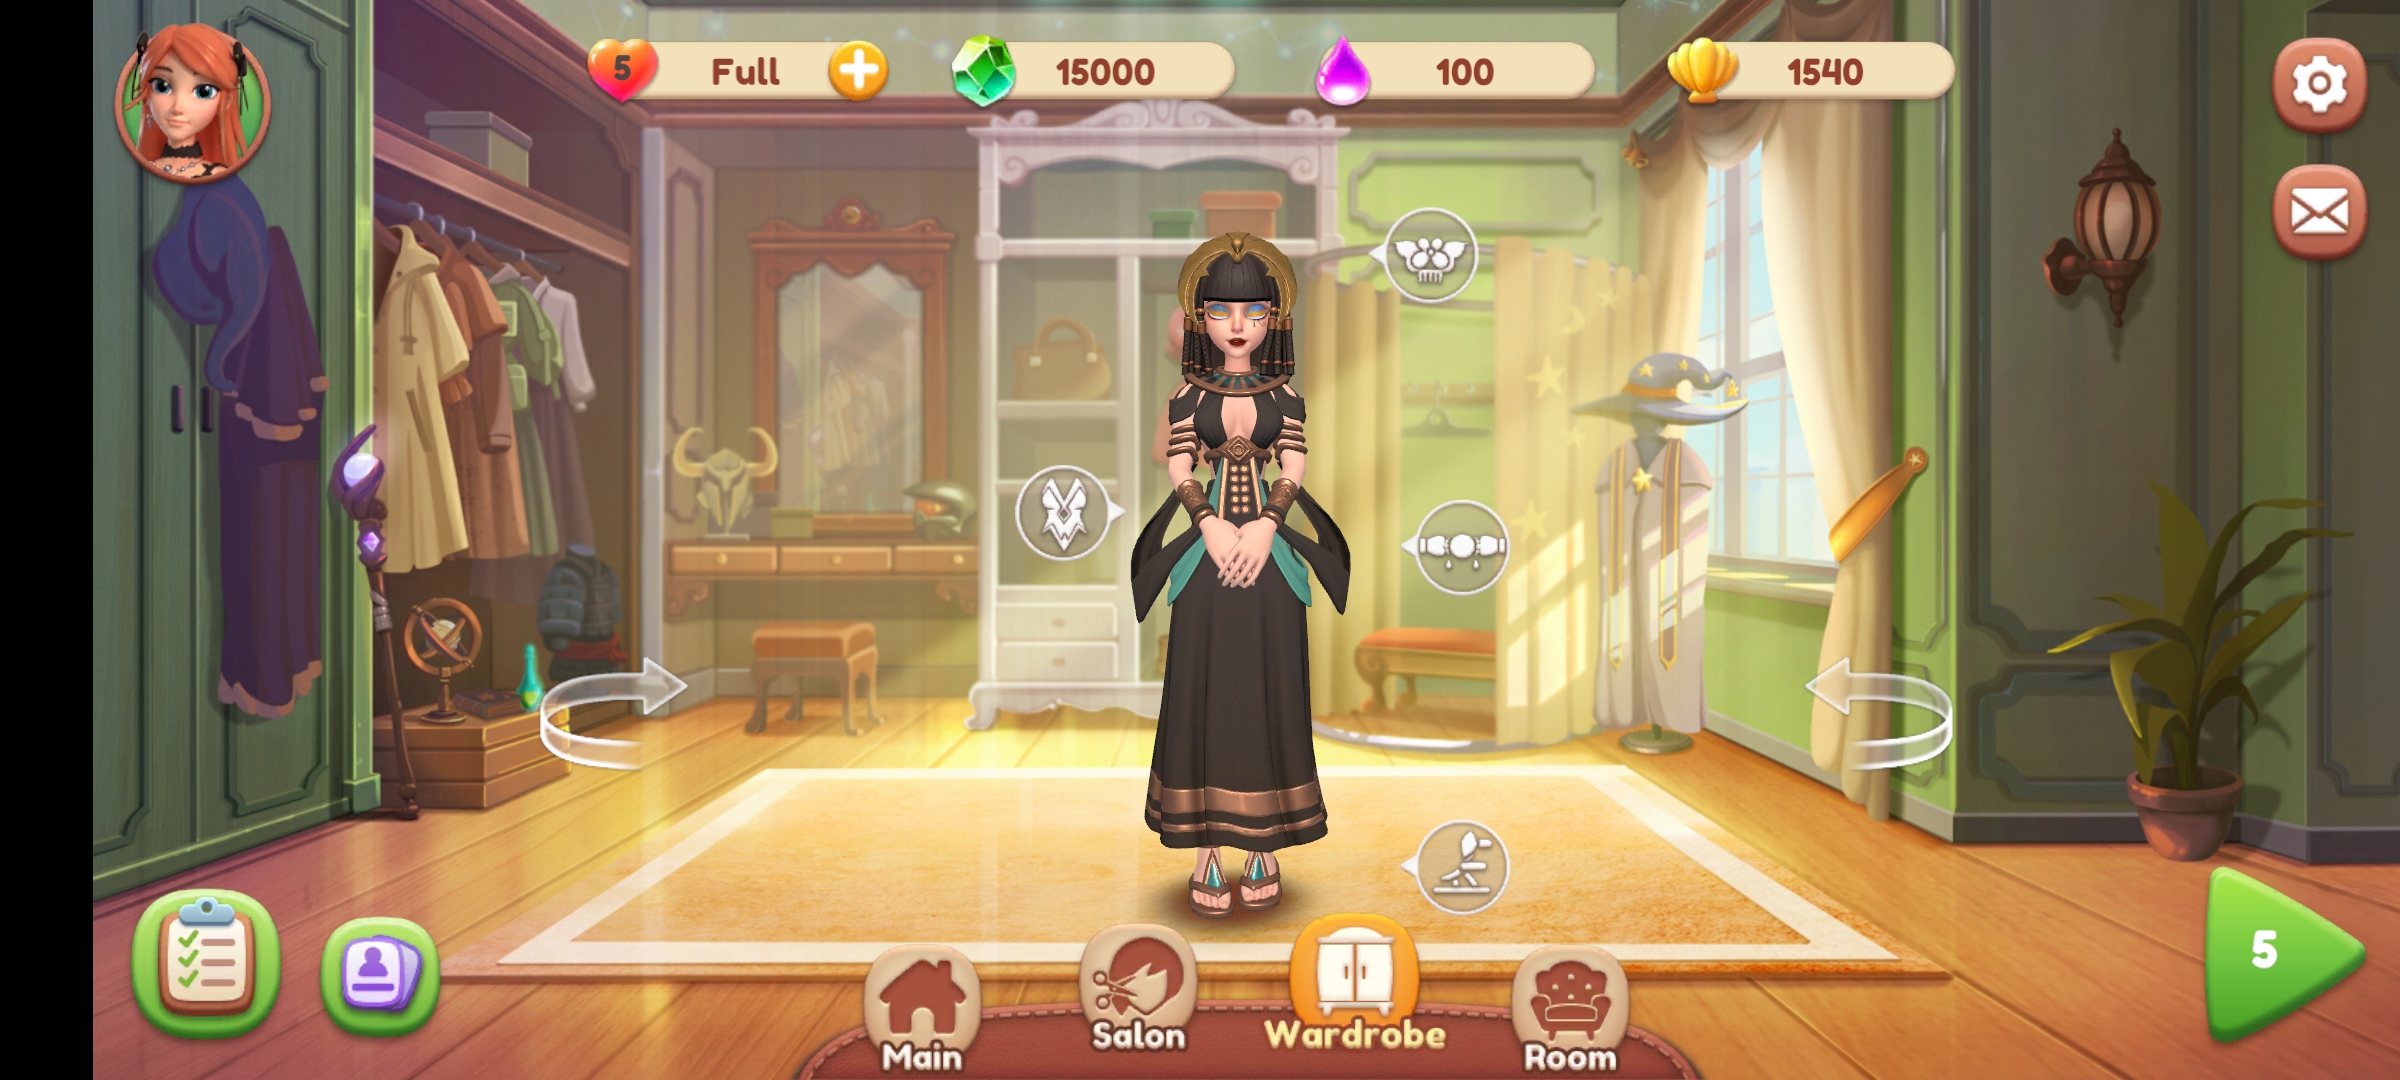 Game Dream Journey Makeover Cho Android